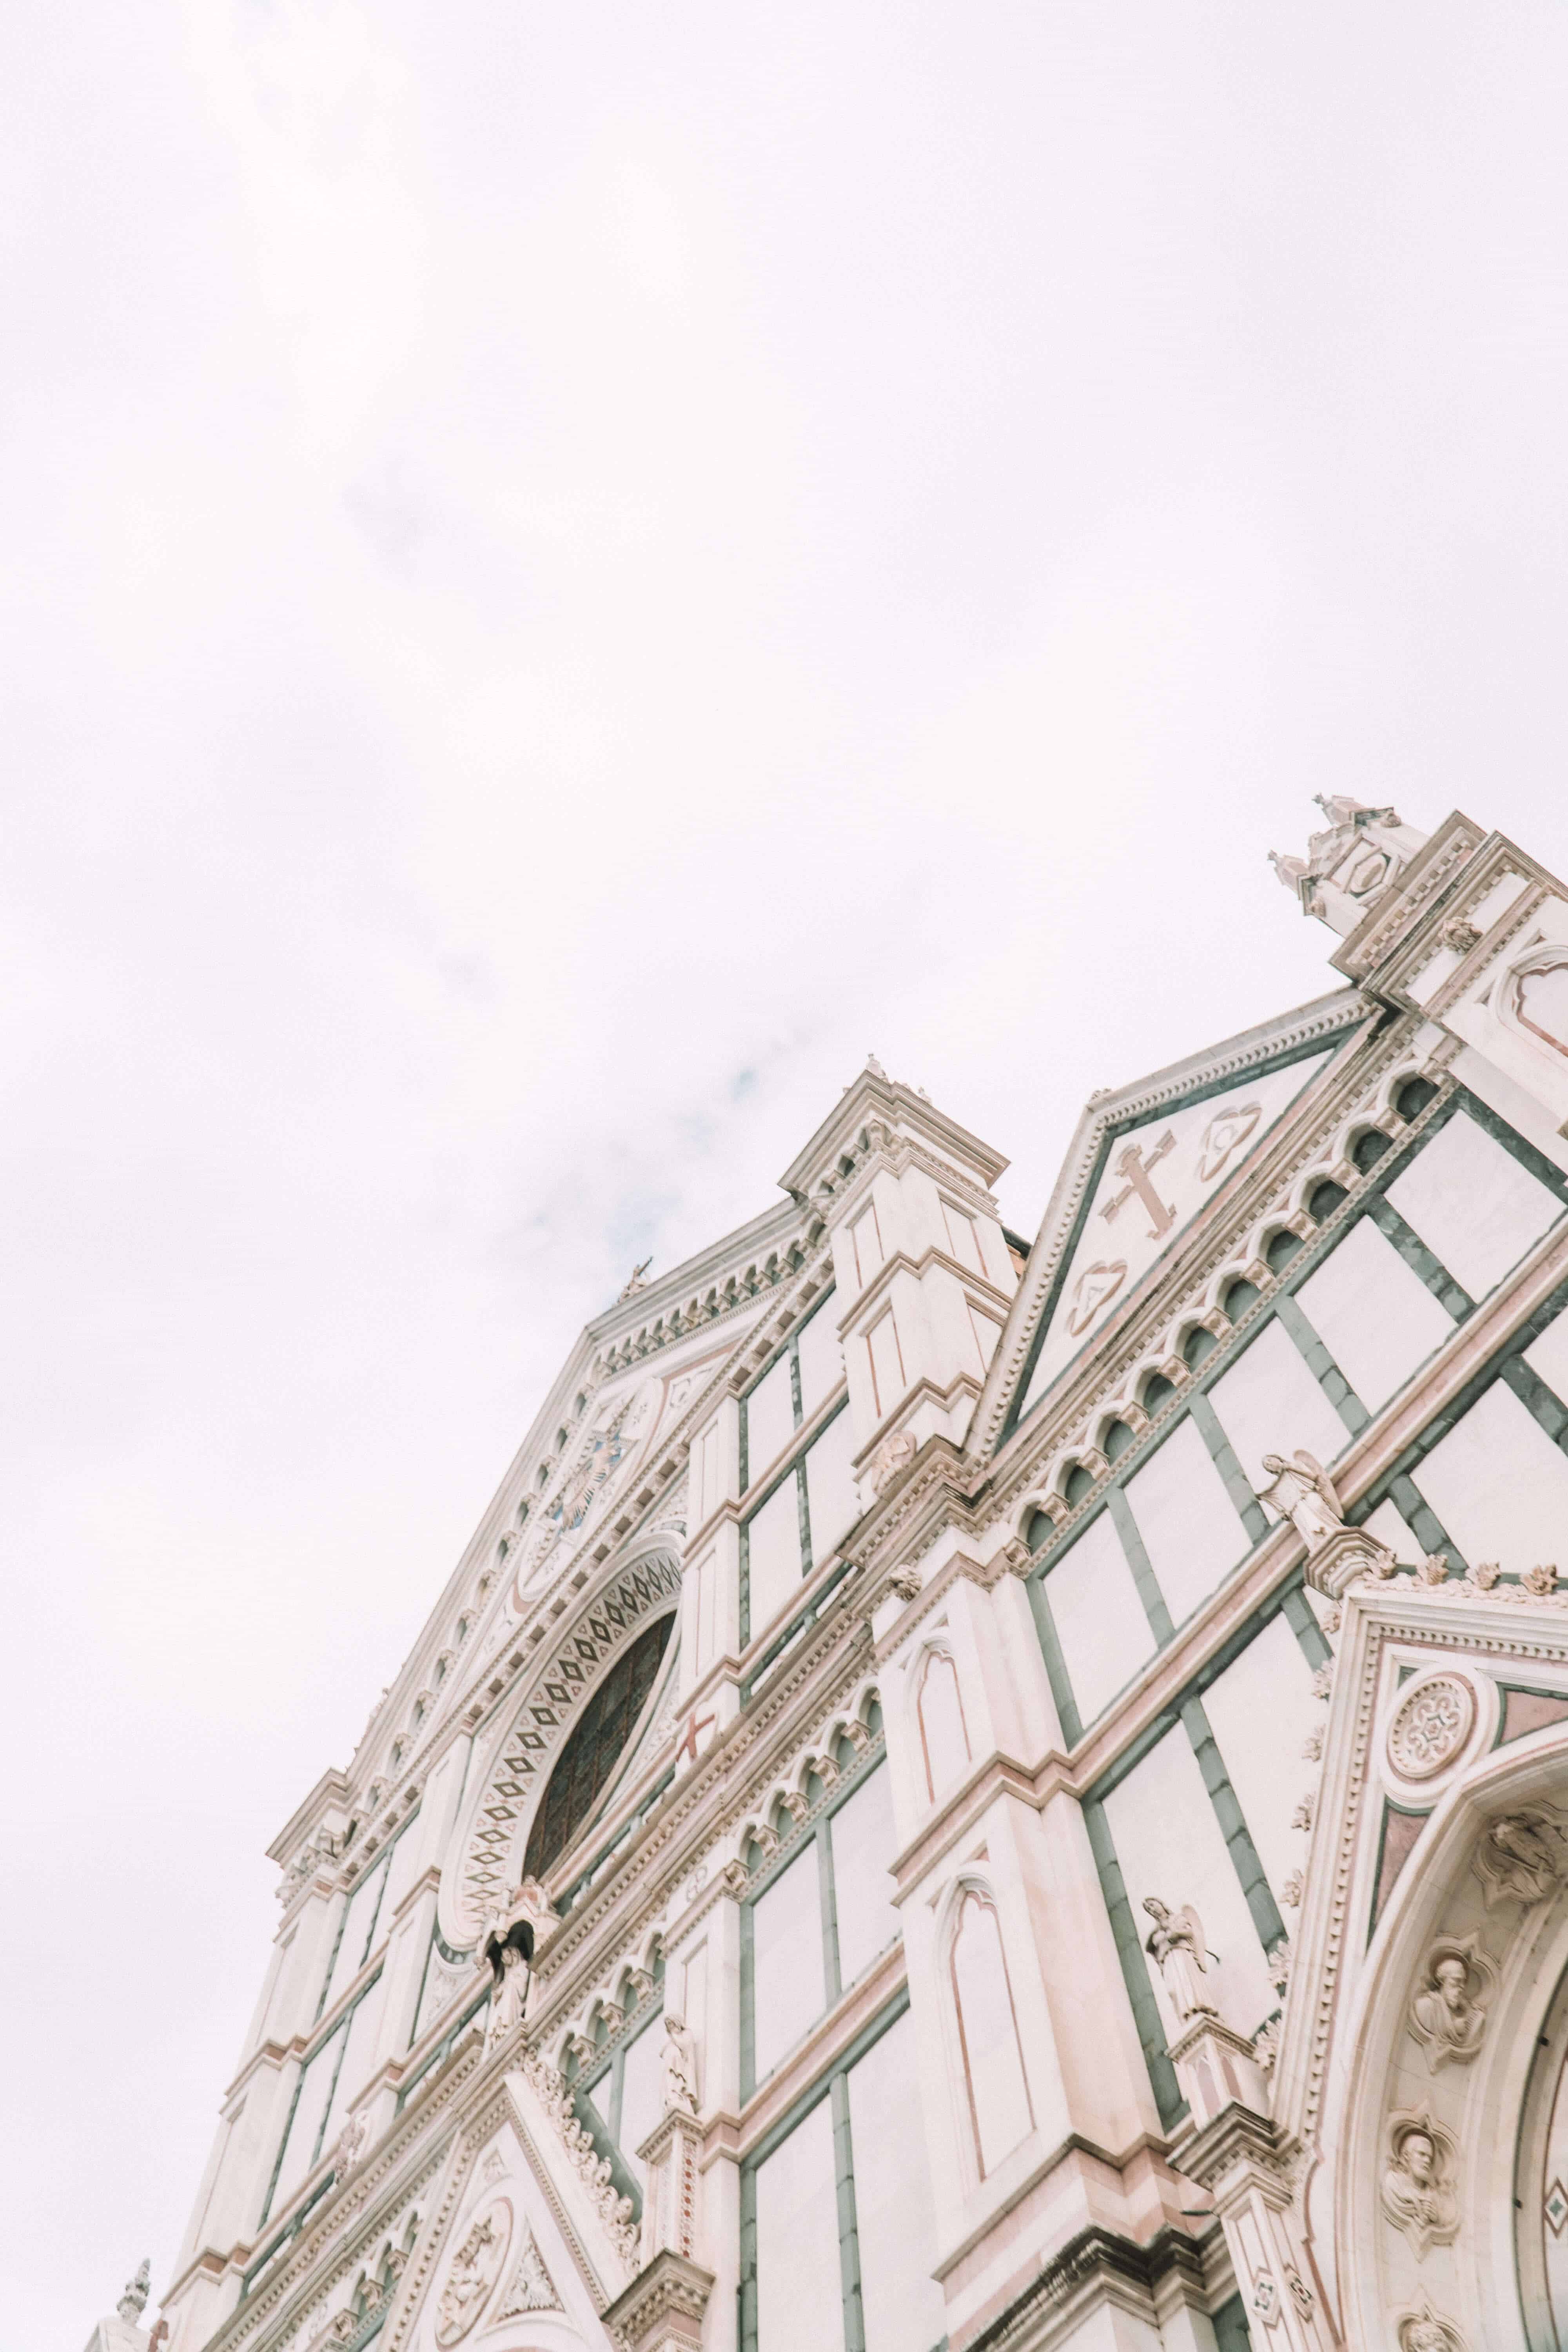 The Ultimate Guide to Florence Italy | Santa Croce | The Republic of Rose | #Florence #Italy #Tuscany #Europe #Travel